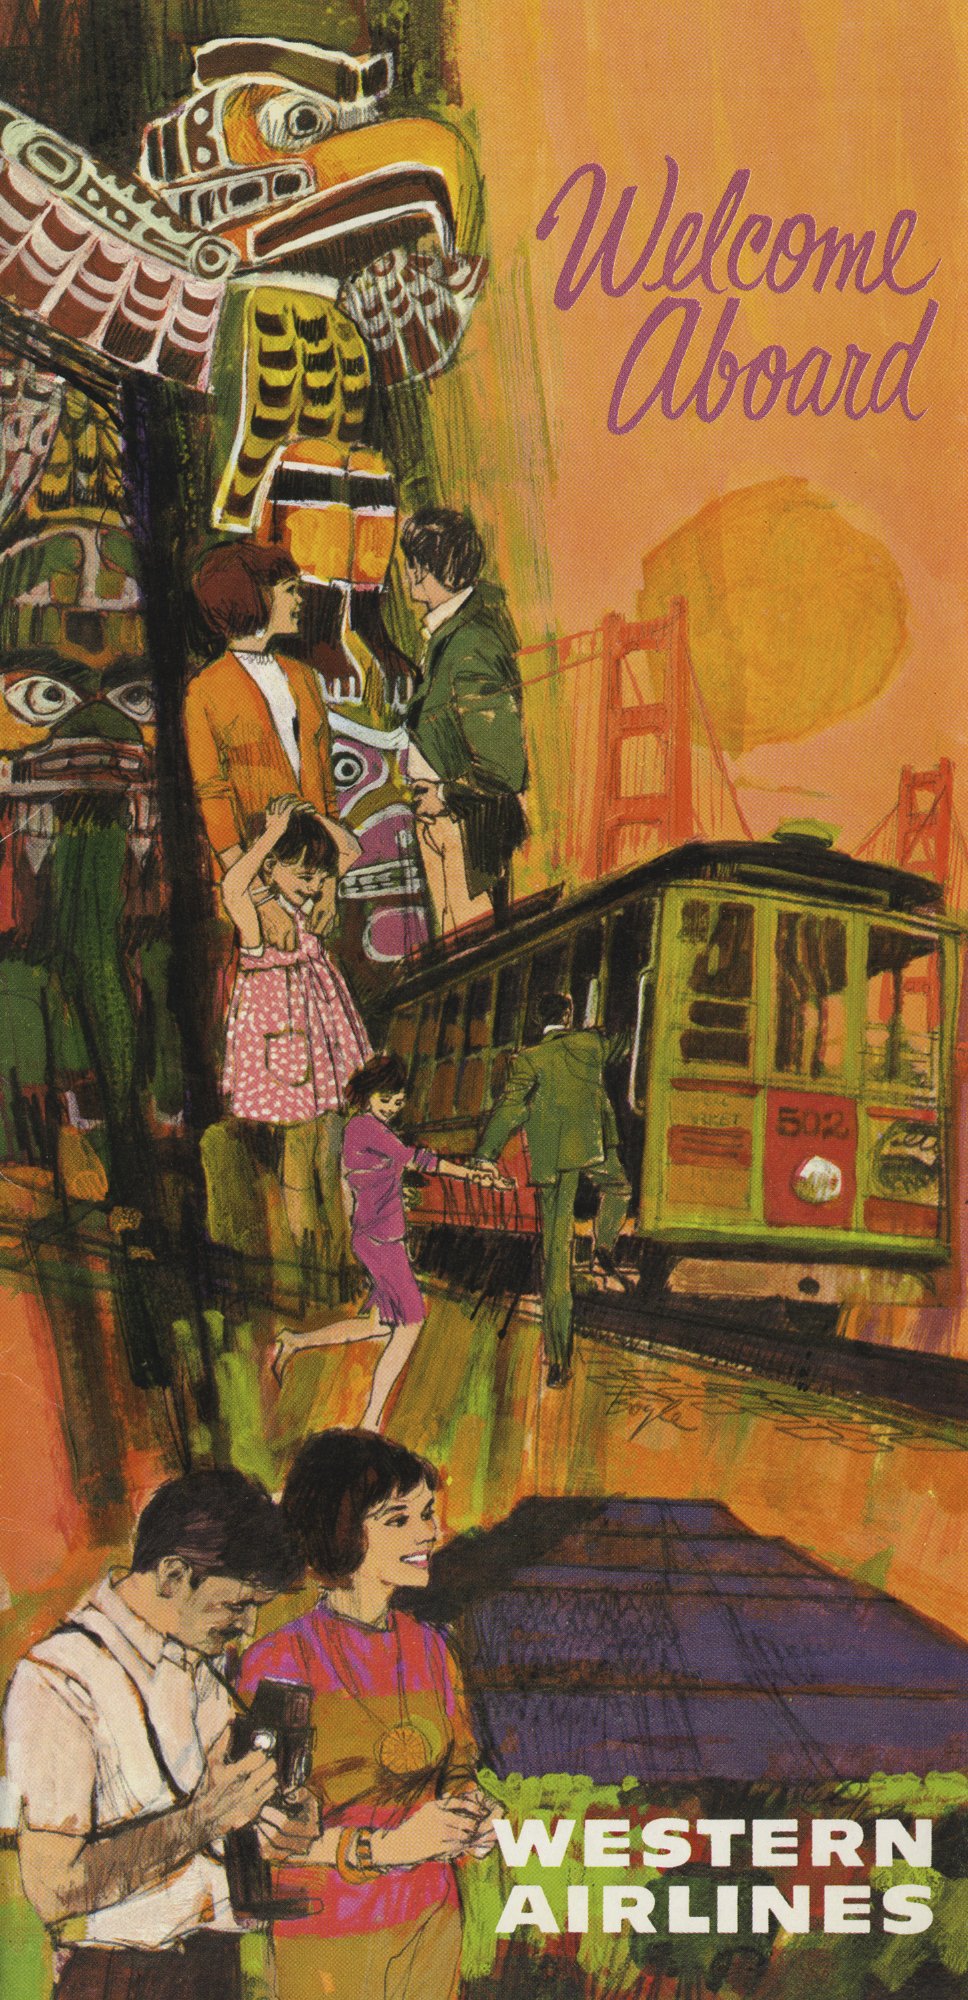 San Francisco &amp; the Pacific Northwest are featured on this 1970s Western Airline in-flight information packet. #avgeek #vintageadvertisement https://t.co/t7RM2K4Ghy